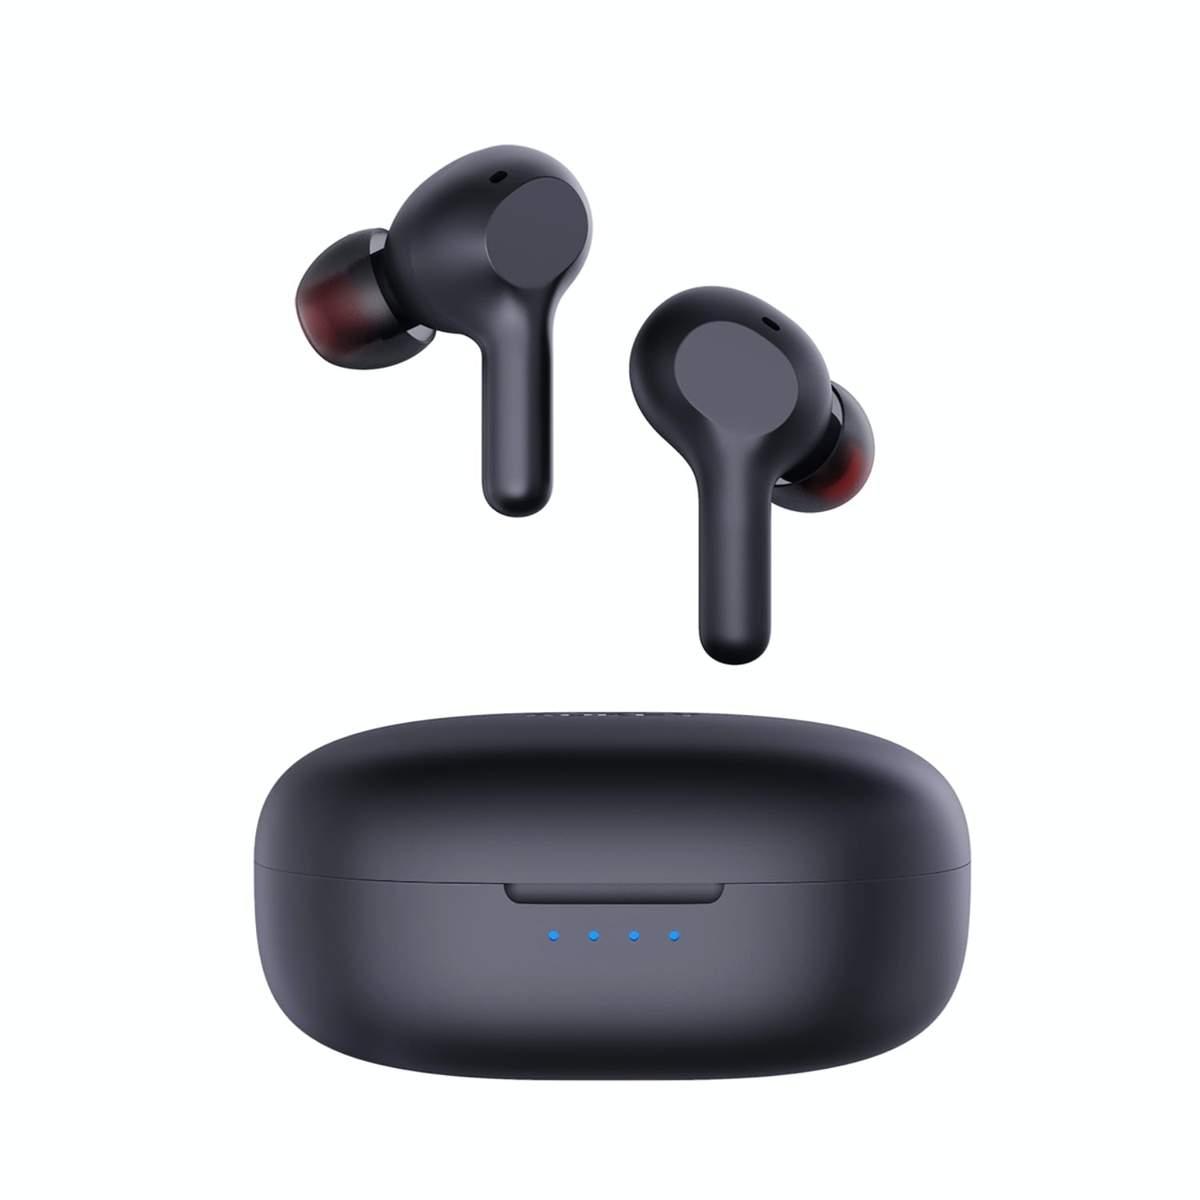 Why Are My Wireless Earbuds Not Connecting